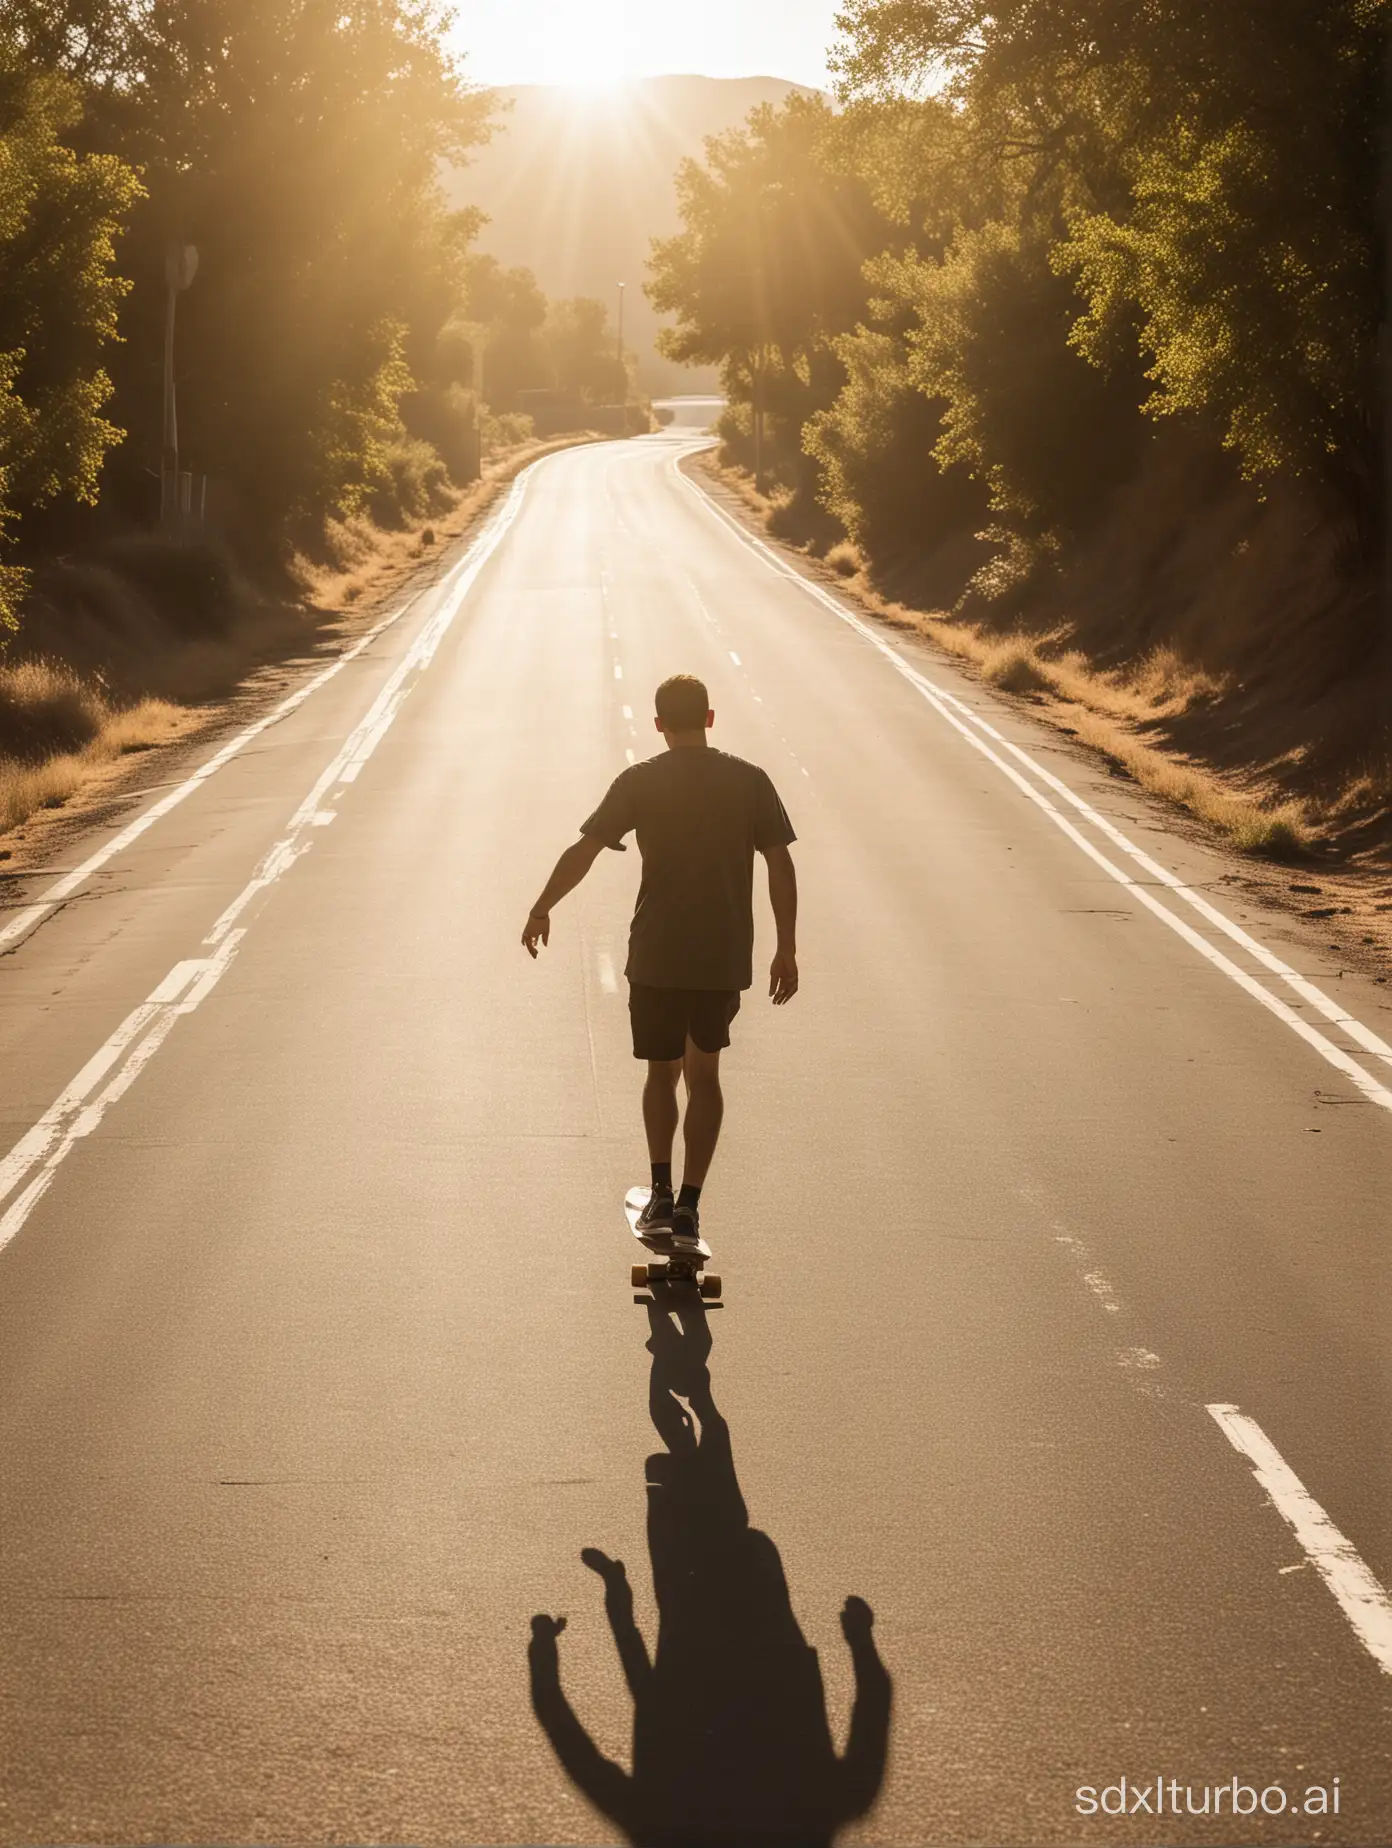 Under the intense glare of the sun, a man skillfully glides on his skateboard, traversing a winding road. His body bends in harmony with the curves of the road as he descends the hill, relishing the sensation of freedom and speed that the skateboard provides. The sun, high in the sky, casts golden rays upon the scene, creating long shadows that dance to the rhythm of his movement.

The warm asphalt seems to hum beneath the skateboard's wheels, while the wind against his face brings a refreshing surge of adrenaline. Around him, trees sway gently in the breeze, forming a green tunnel that accompanies his journey. The sound of the skateboard gliding over the pavement blends with the chirping of birds and the distant hum of cars, creating a unique soundtrack for his adventure.

The man smiles, his eyes sparkling with the thrill of the descent, as he fully embraces the experience. Each curve, each descent is an adventure, an opportunity to feel the pulsating energy of outdoor life. The sunny day and the open road stretch out before him, inviting him to explore and lose himself in the freedom of movement.